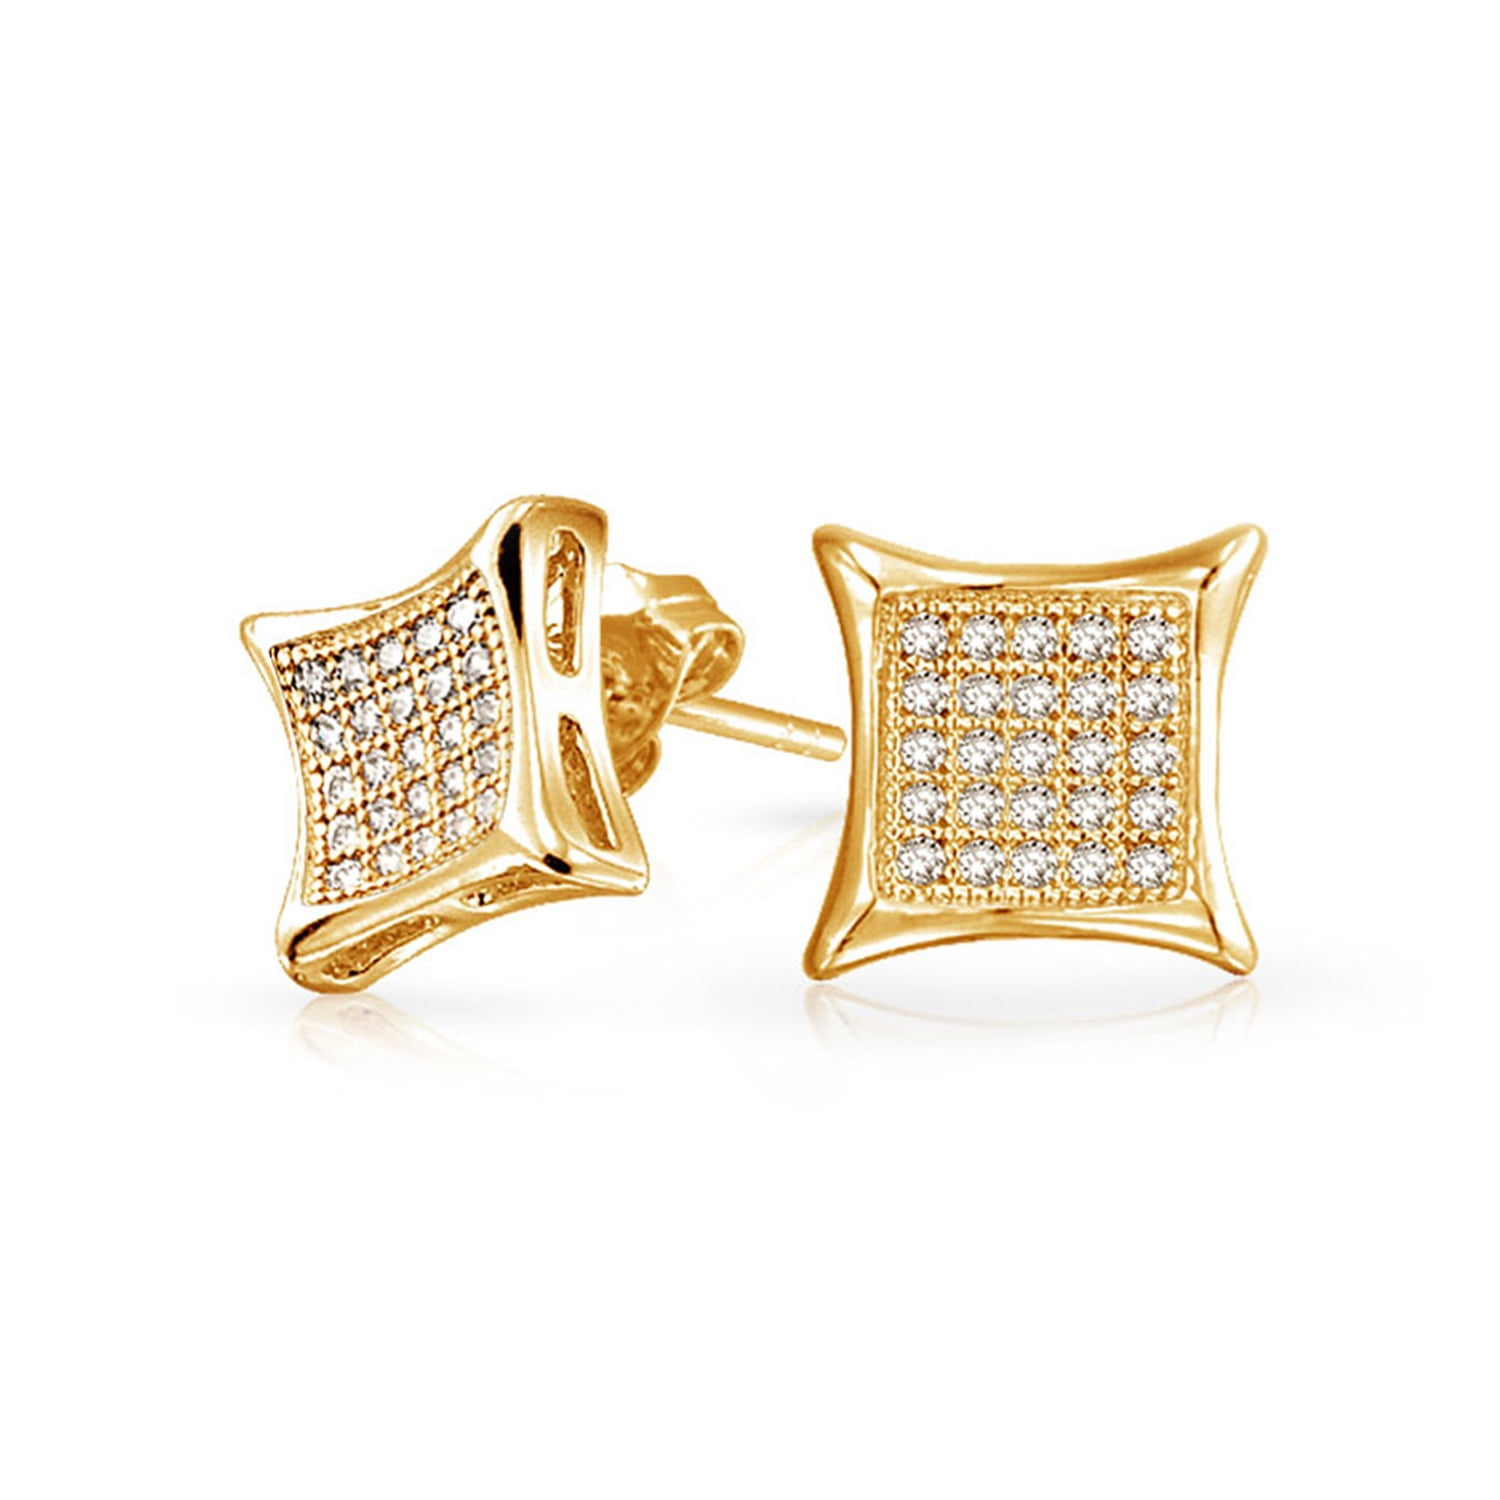 14k 11mm Square Cubic Zirconia Post Earrings 14 kt Yellow Gold 